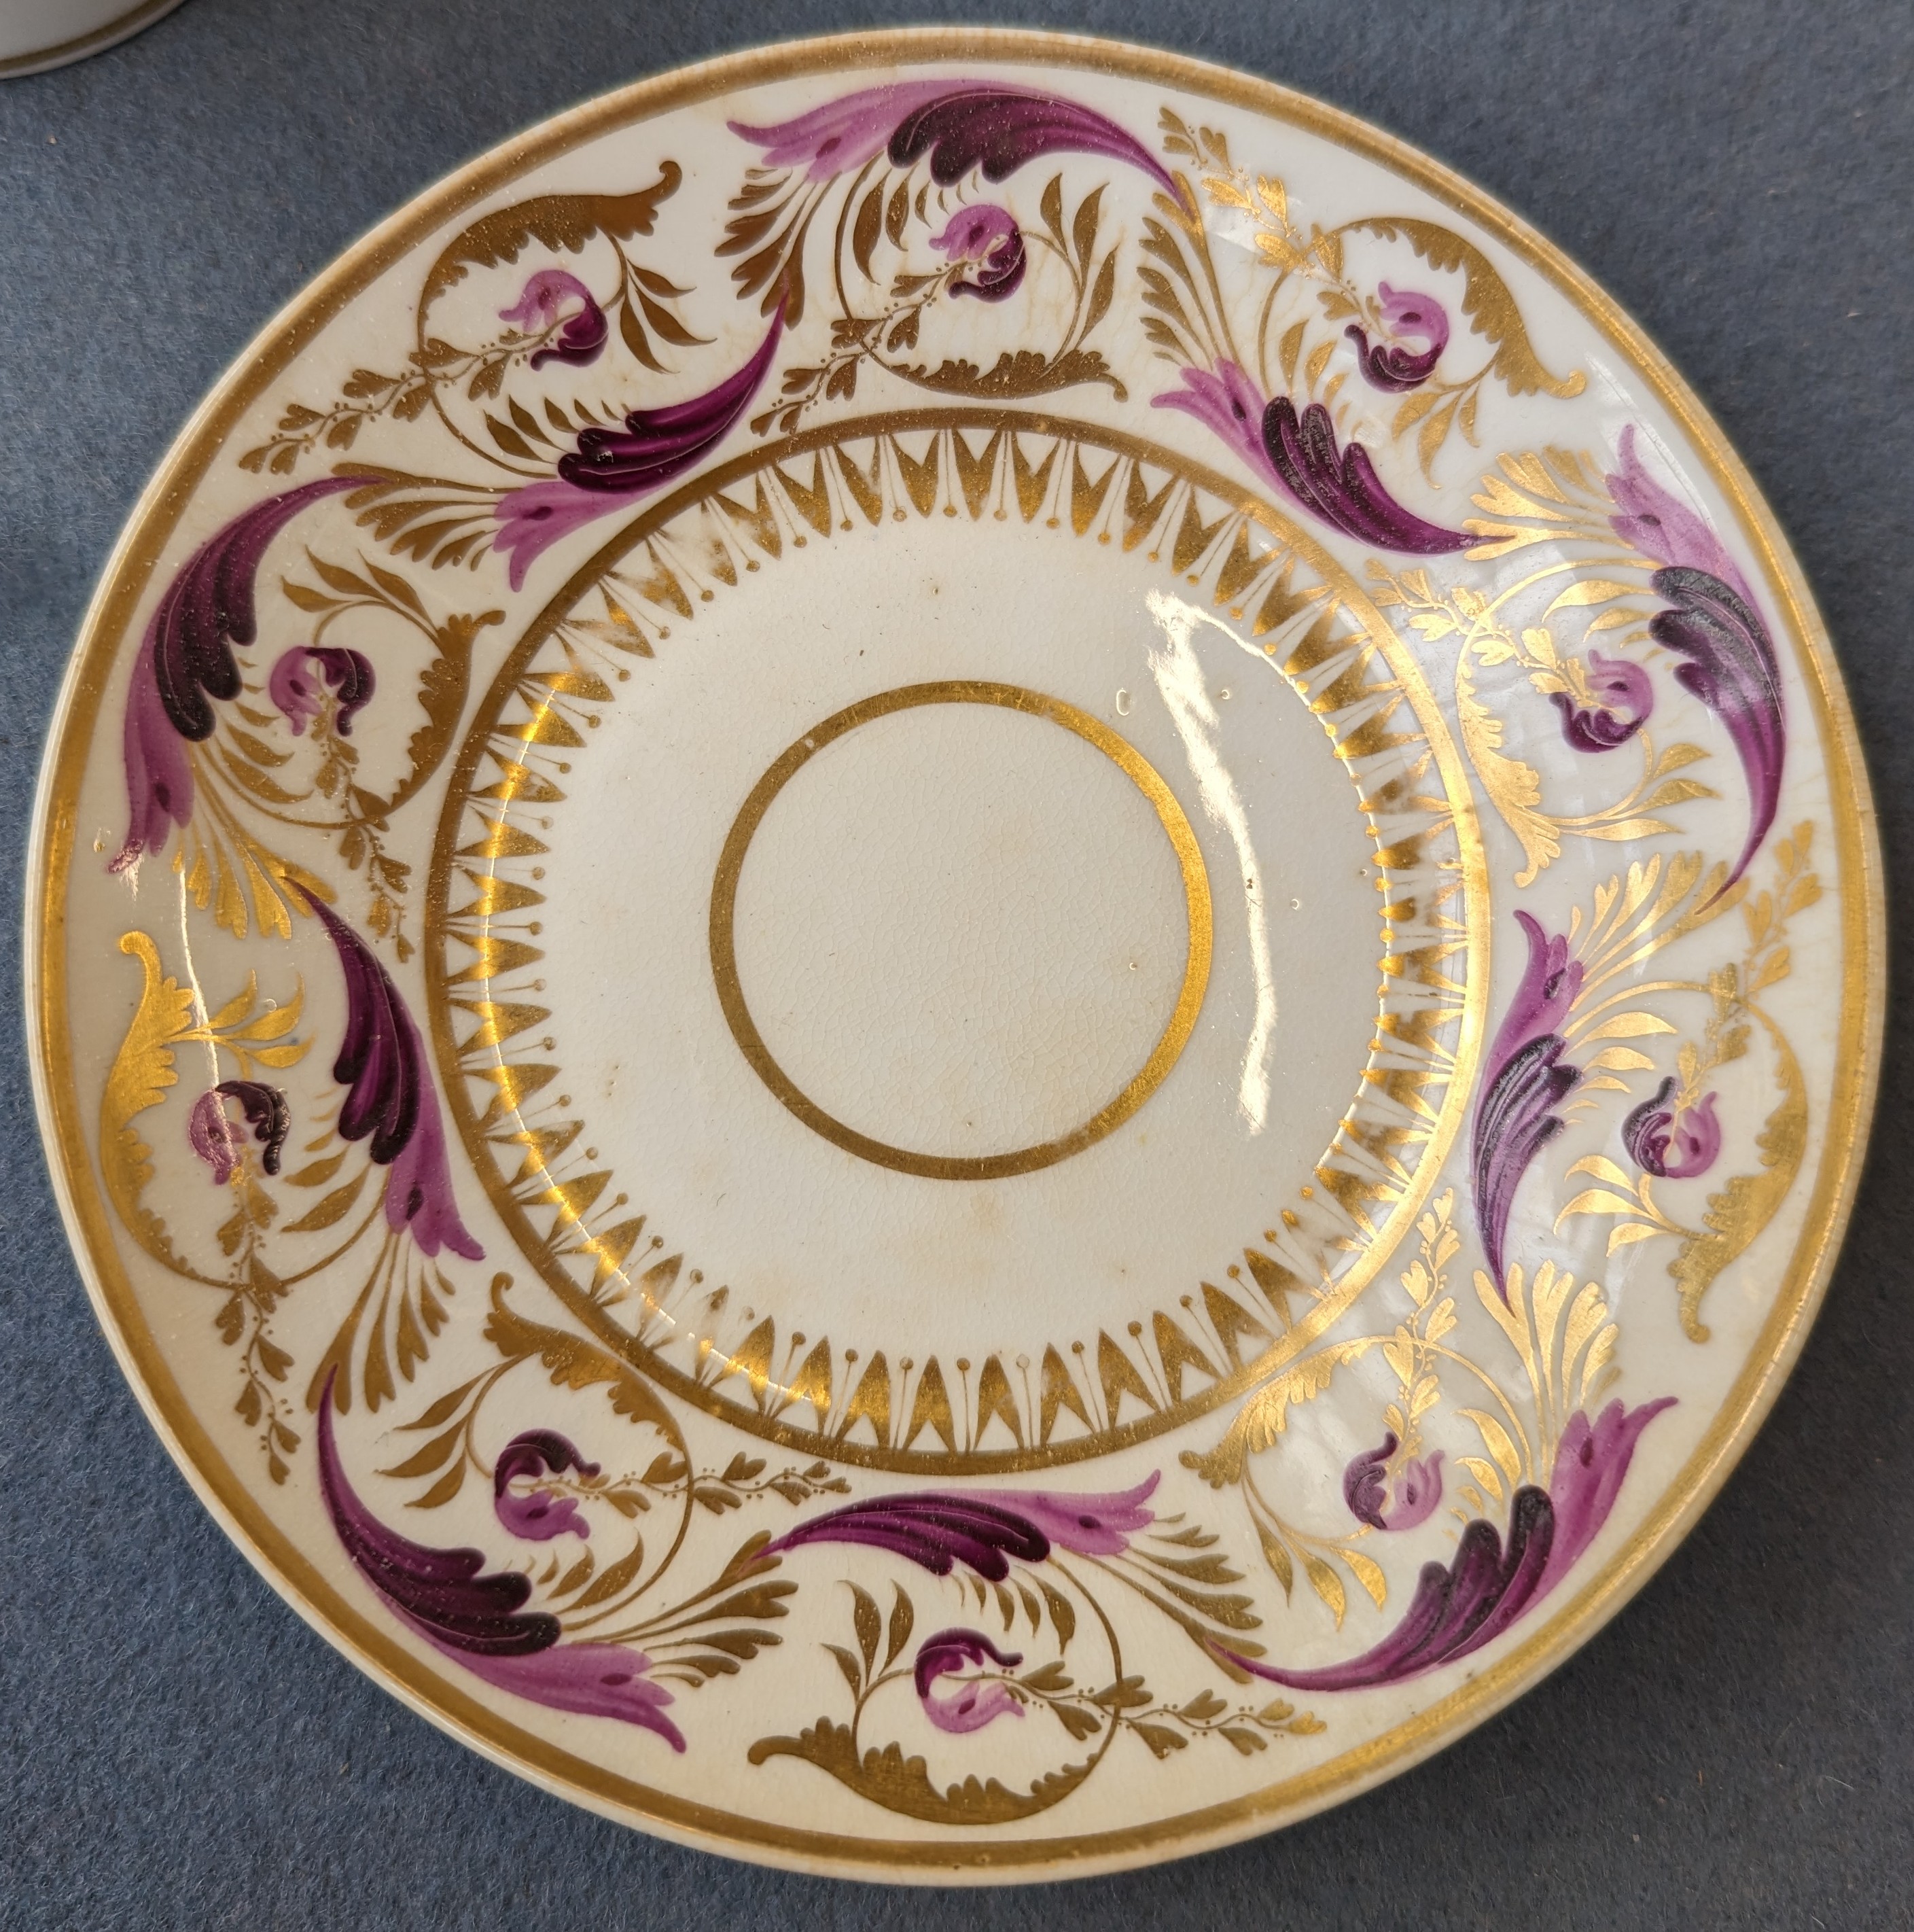 An early 19th century Derby named view teacup, coffee cup and saucer, the cups hand painted with a - Image 10 of 12